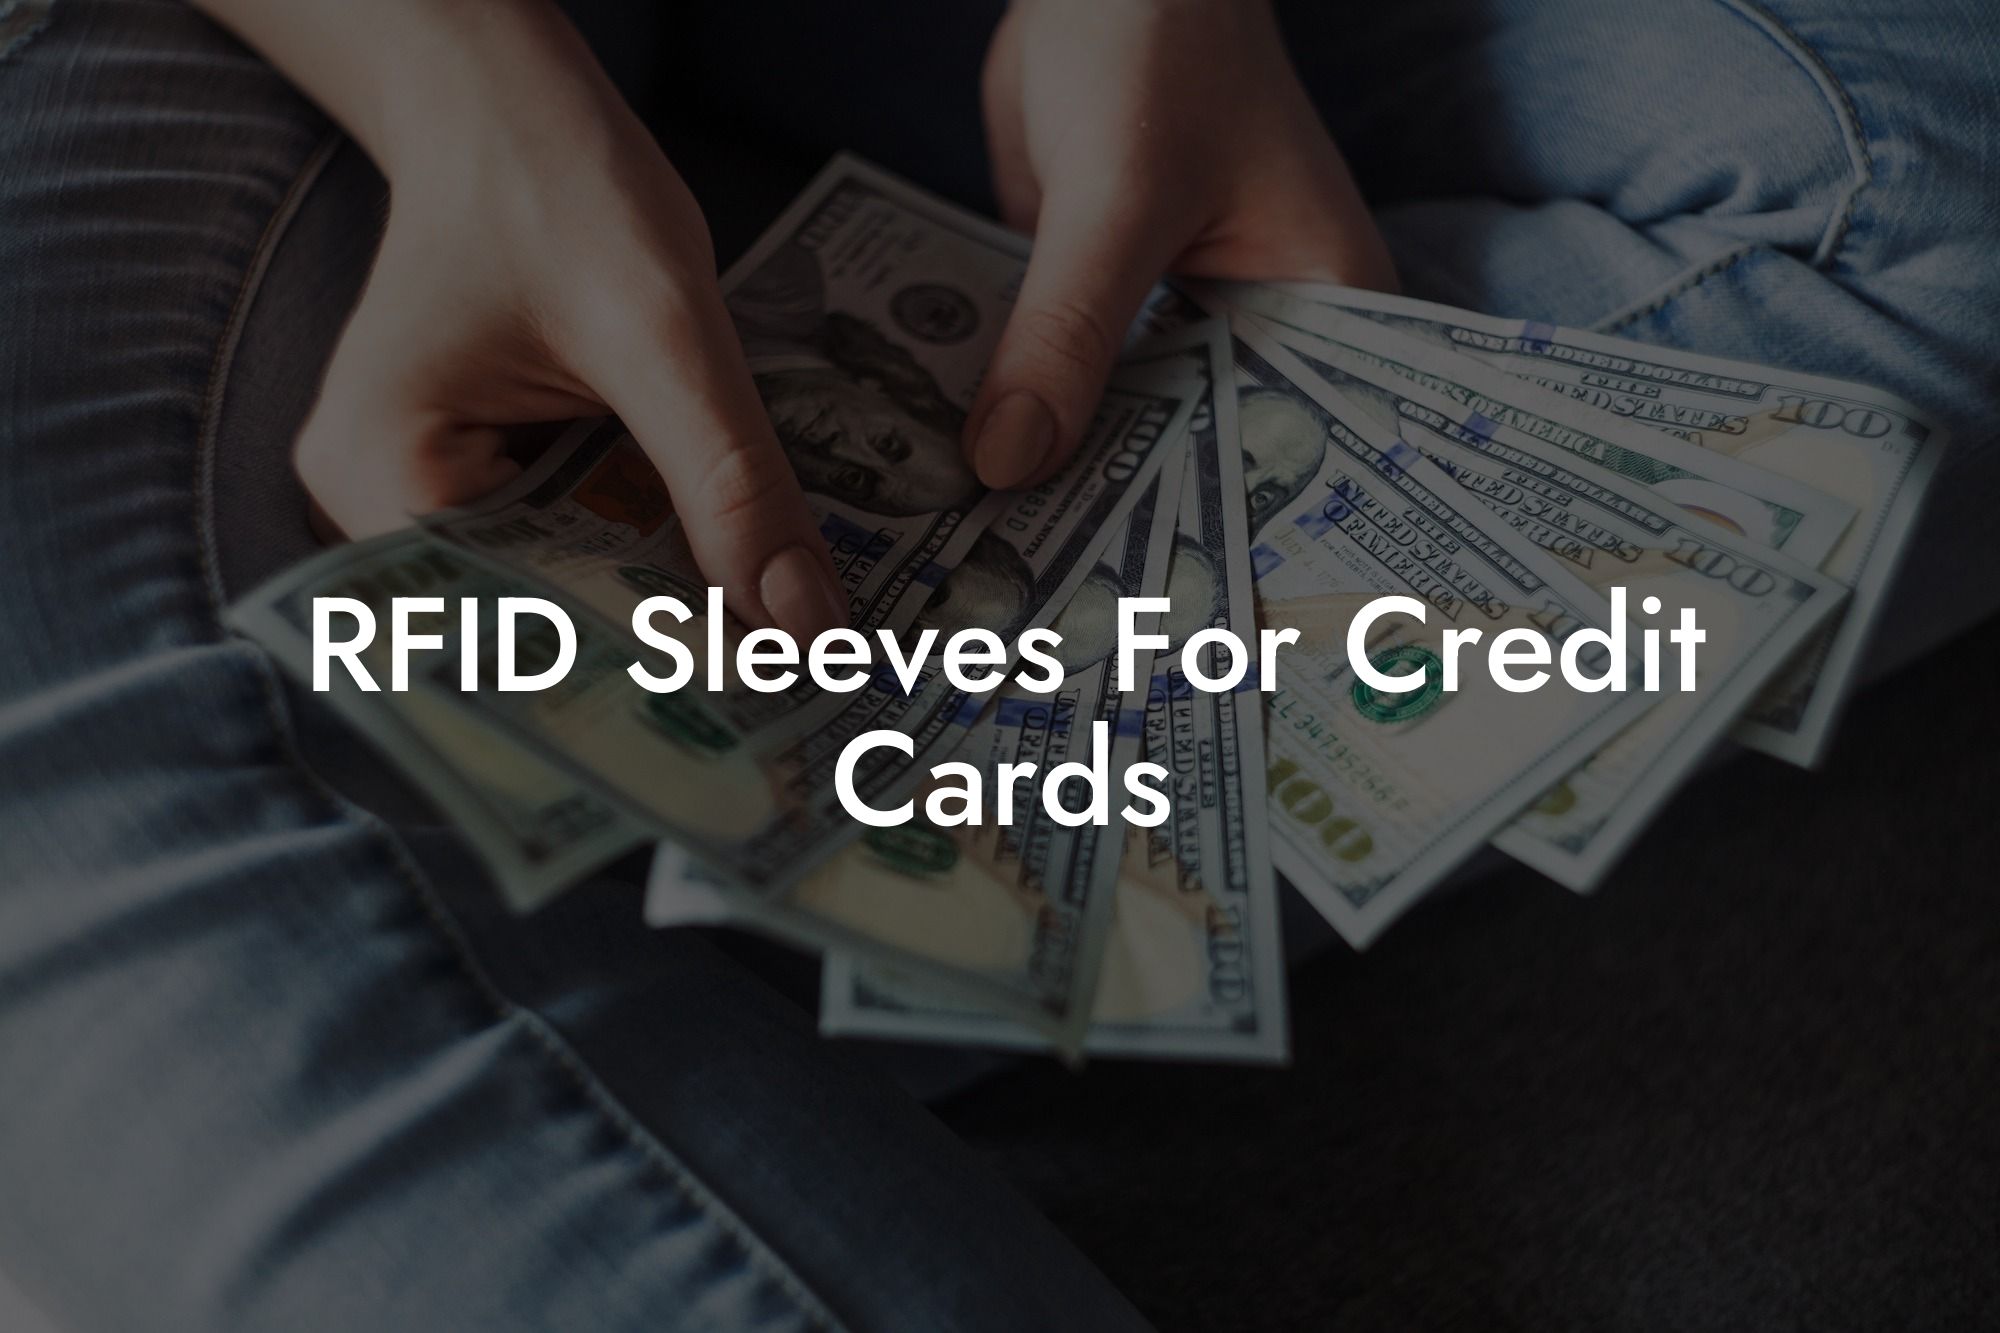 RFID Sleeves For Credit Cards